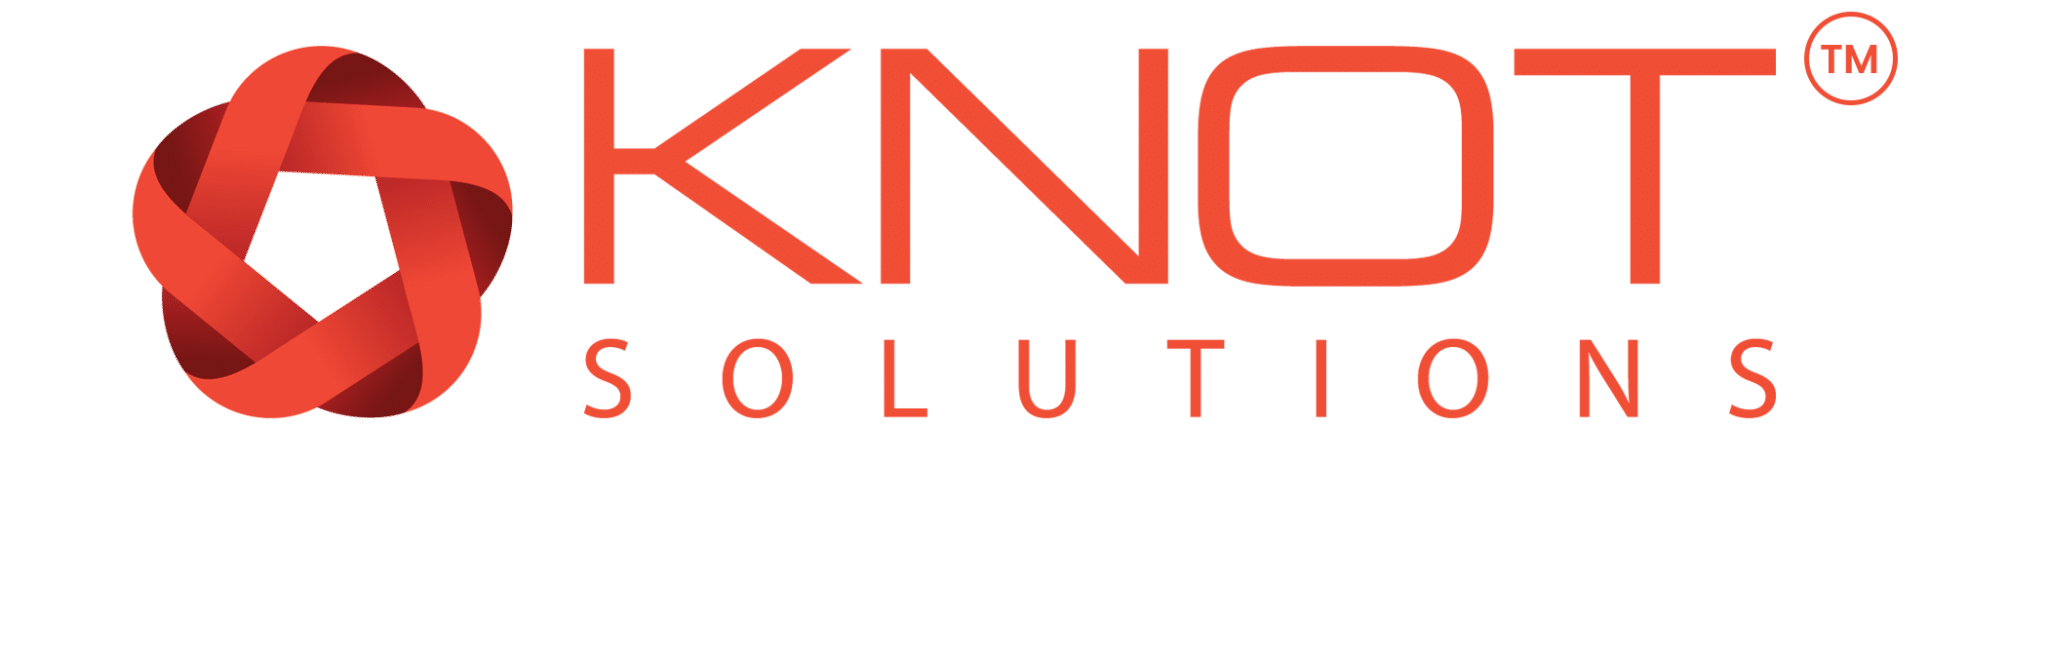 New Knot Solutions logo